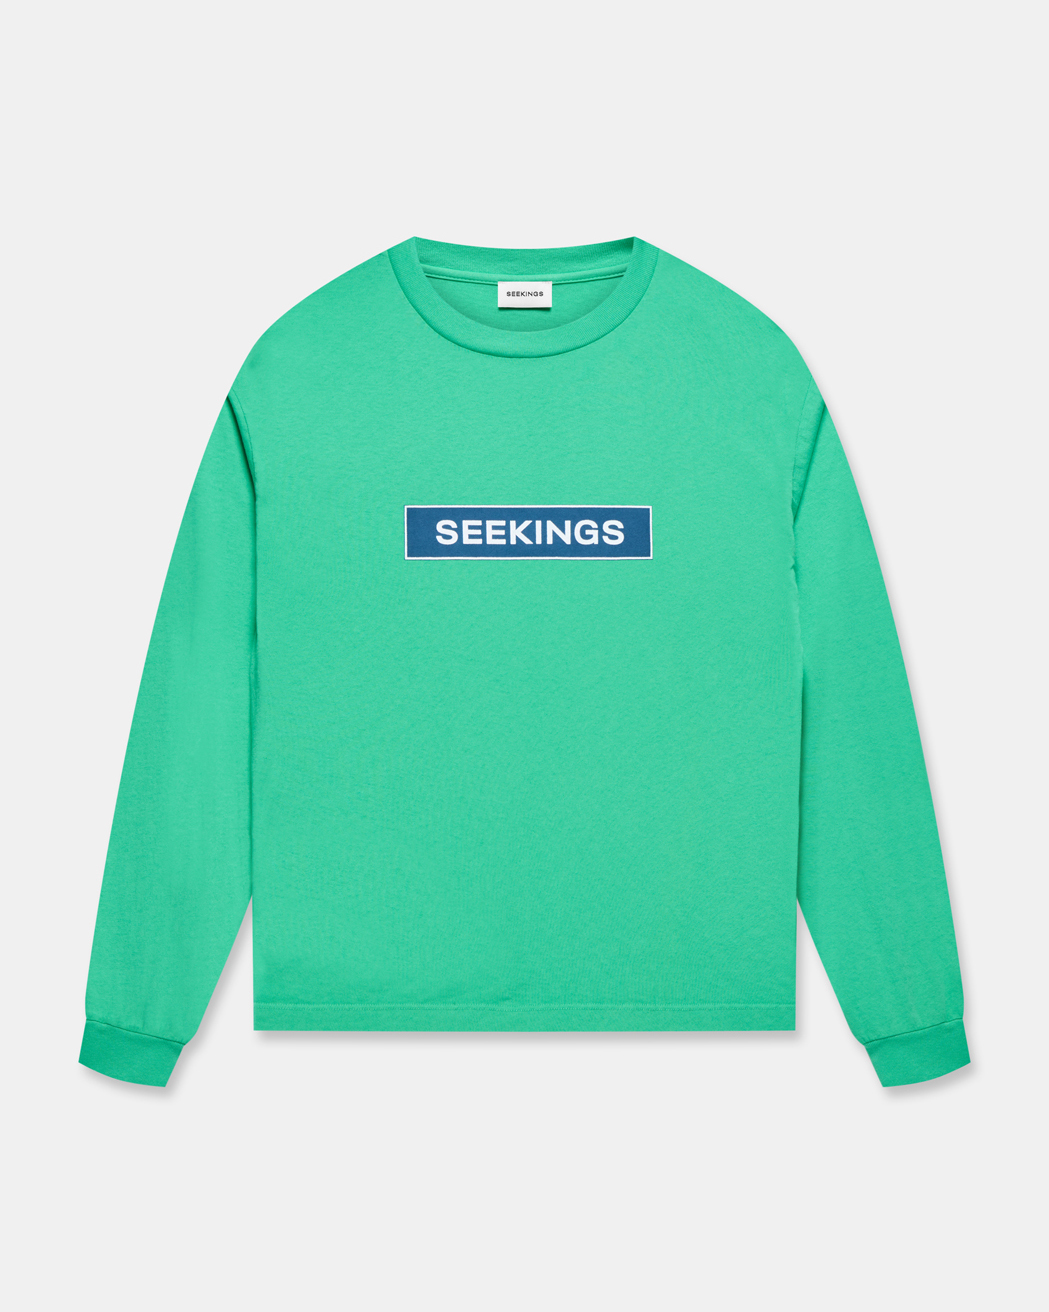 seekings-clothing-second-collection-release-price (15)